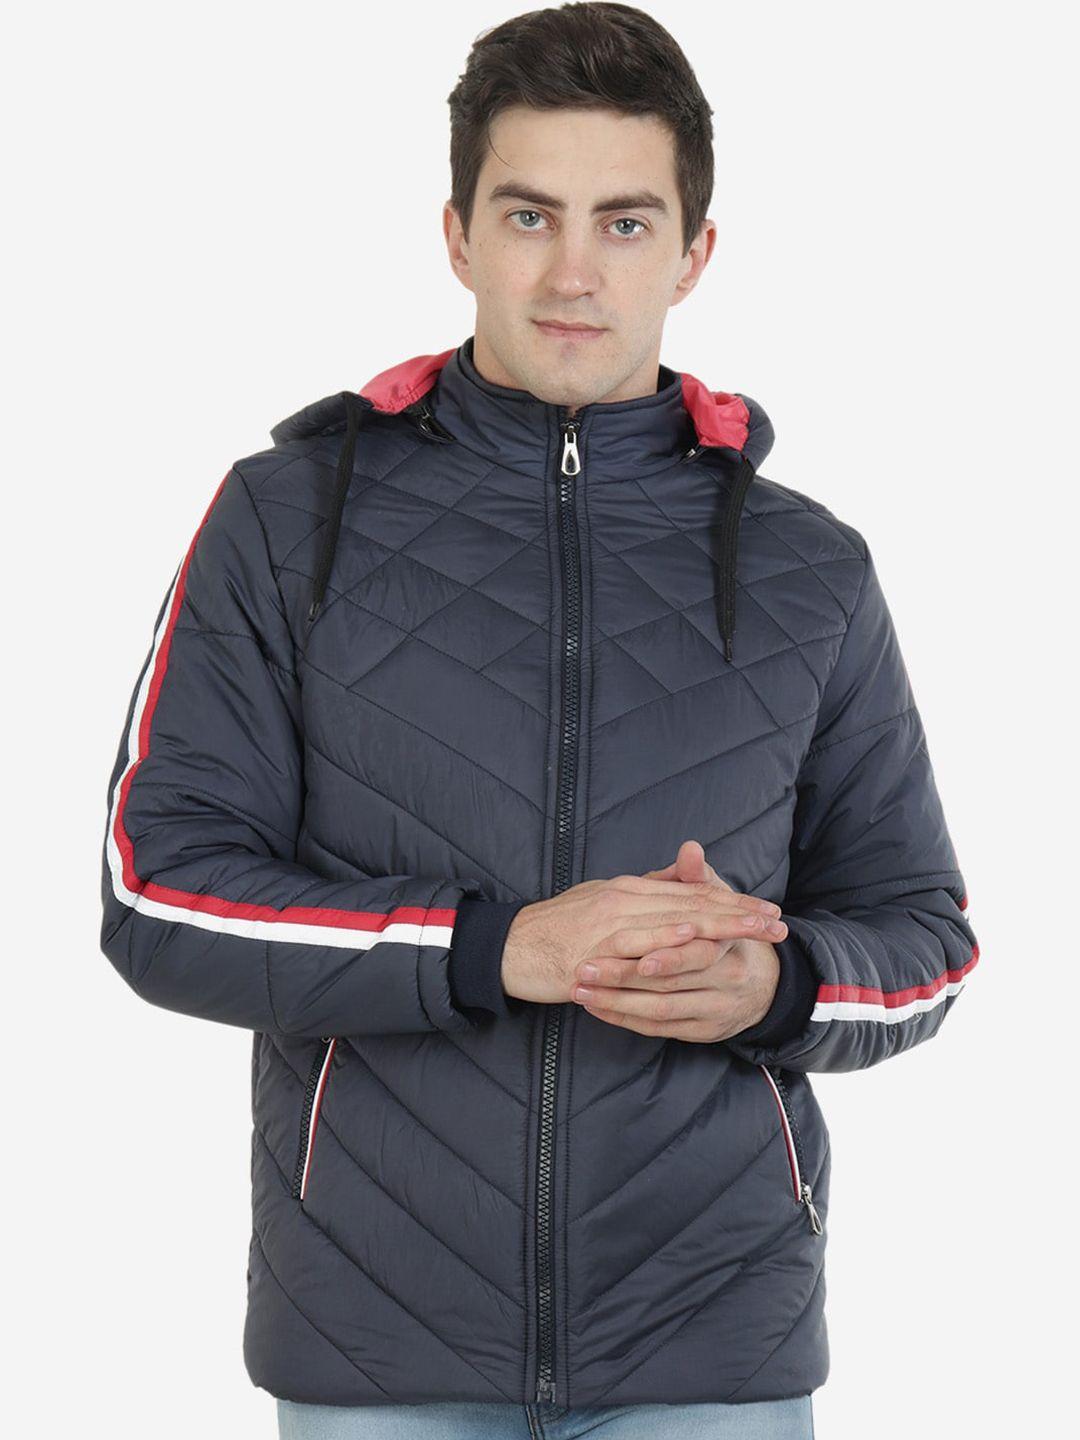 xohy men navy blue solid nylon long sleeves  lightweight padded jacket